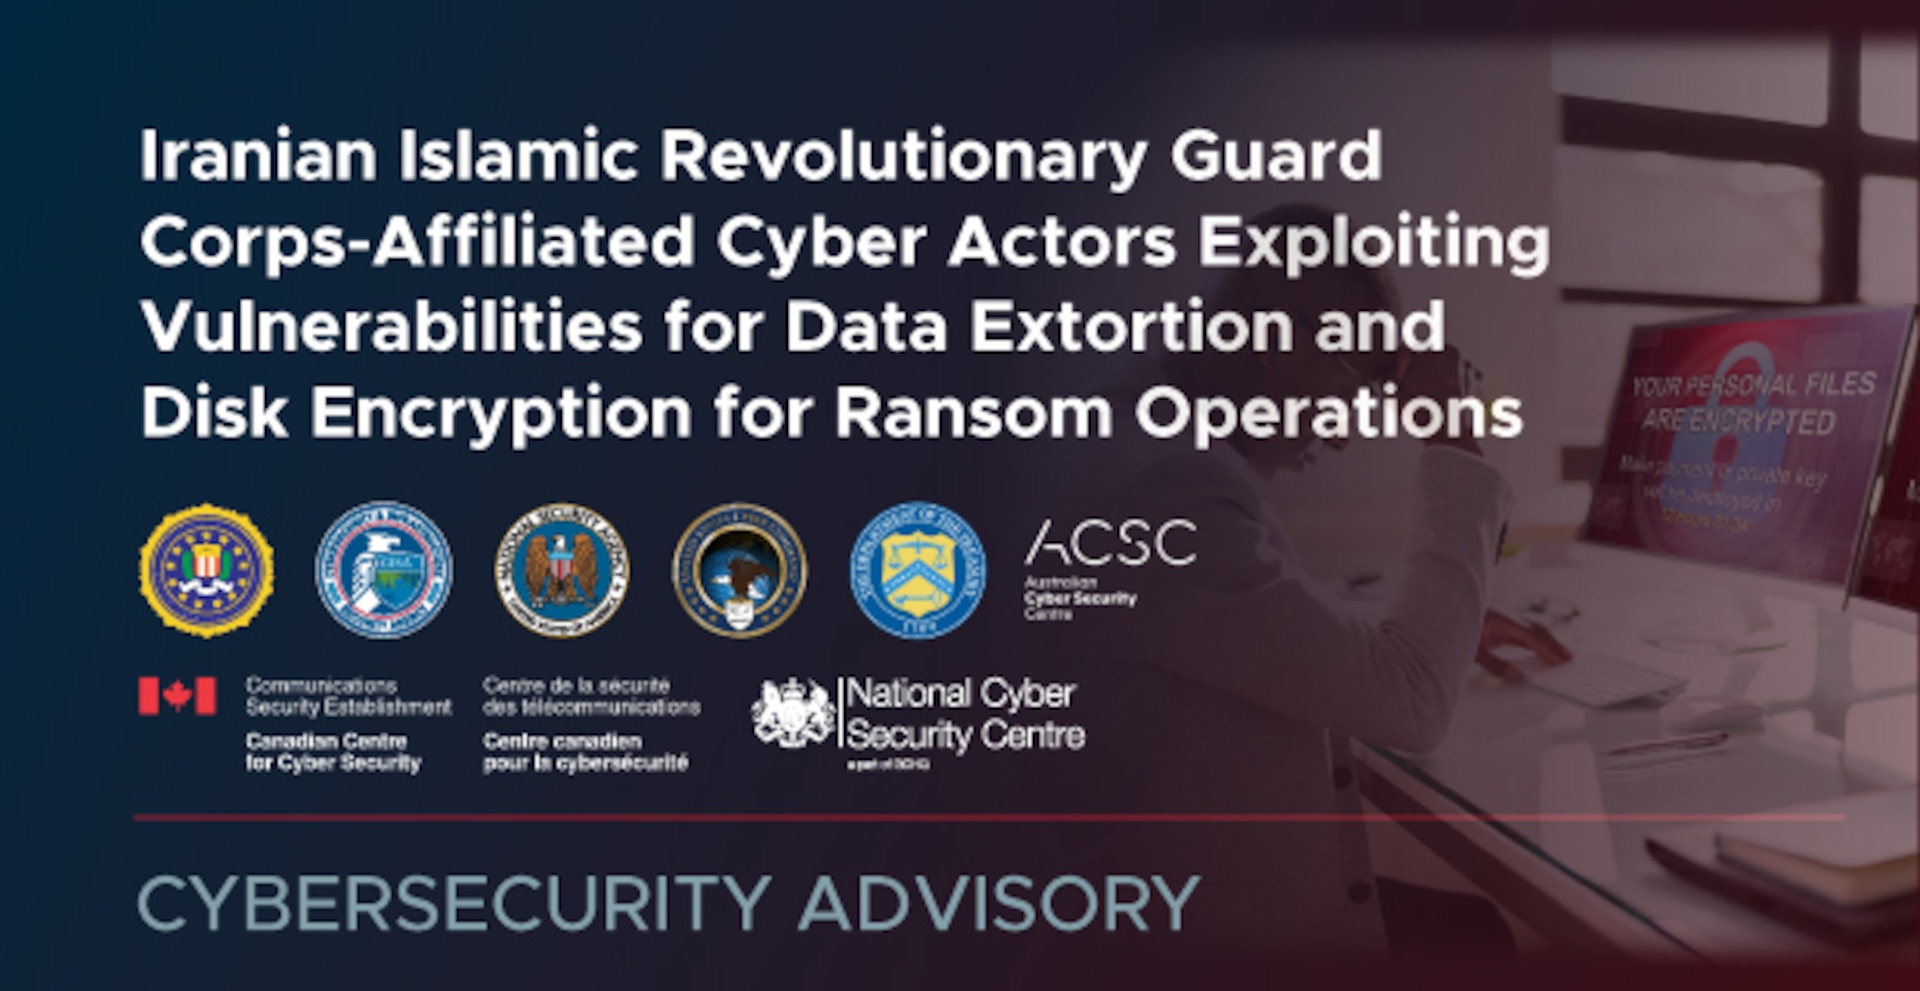 CSA: Iranian Islamic Revolutionary Guard Corps-Affiliated Cyber Actors Exploiting Vulnerabilities for Data Extortion and Disc Encryption for Ransom Operations.